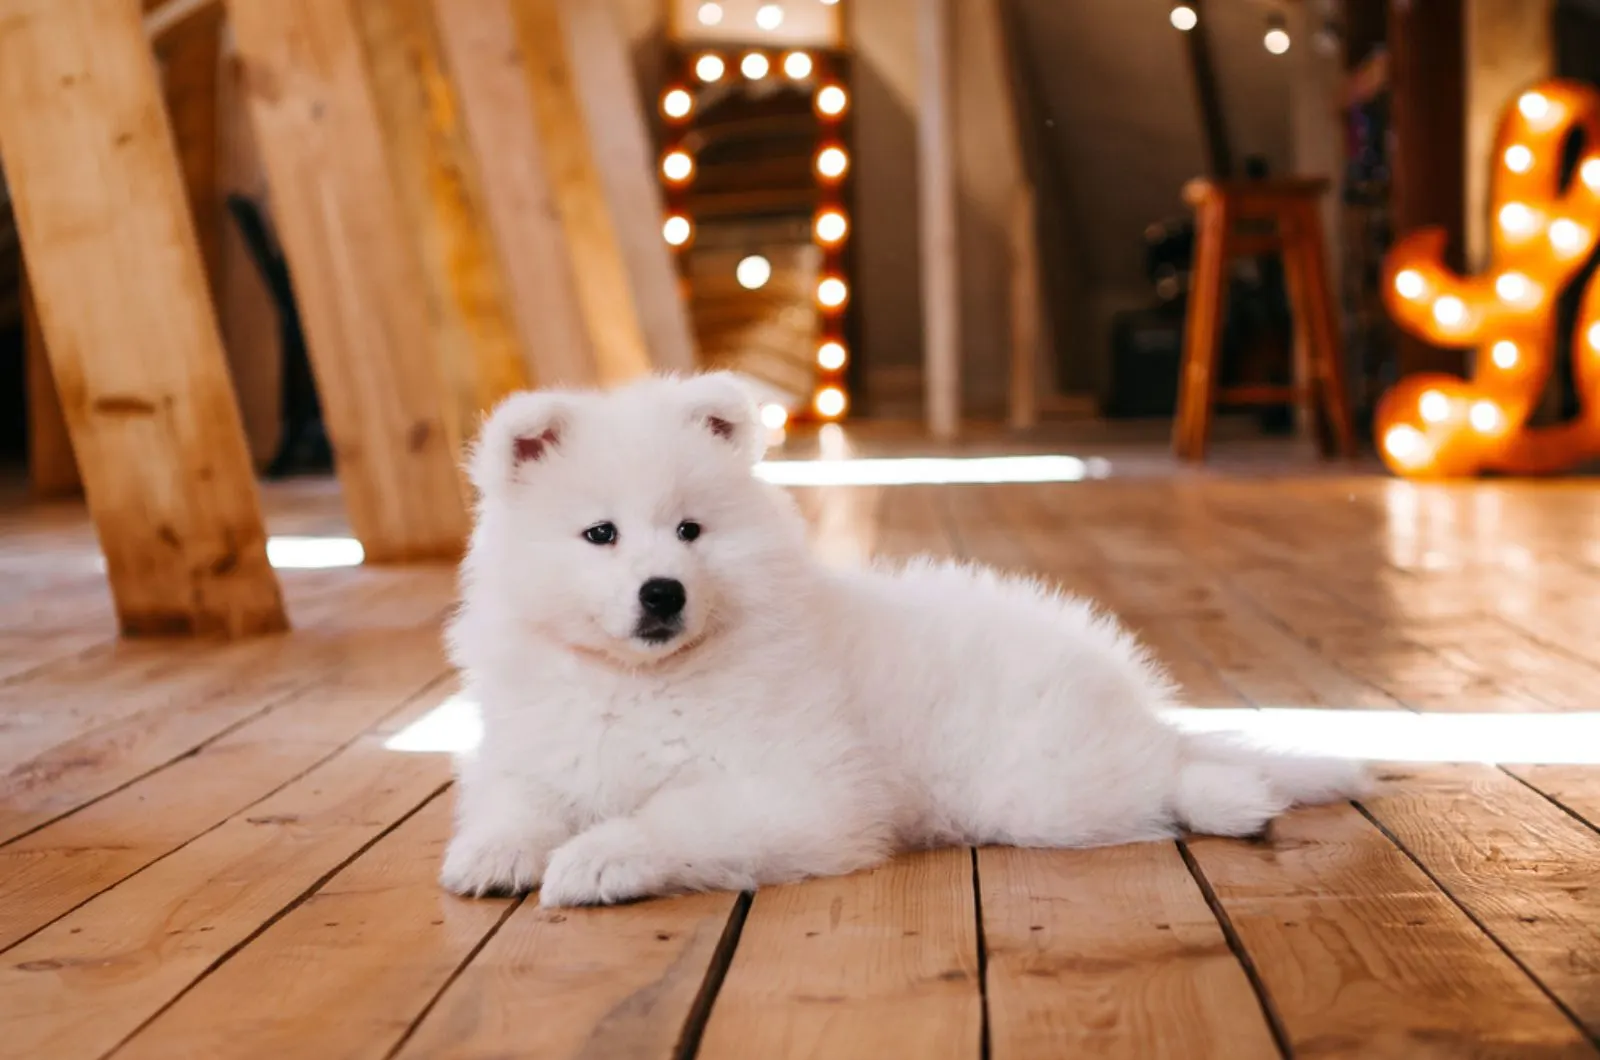 samoyed puppy lying on a wooden floor at home